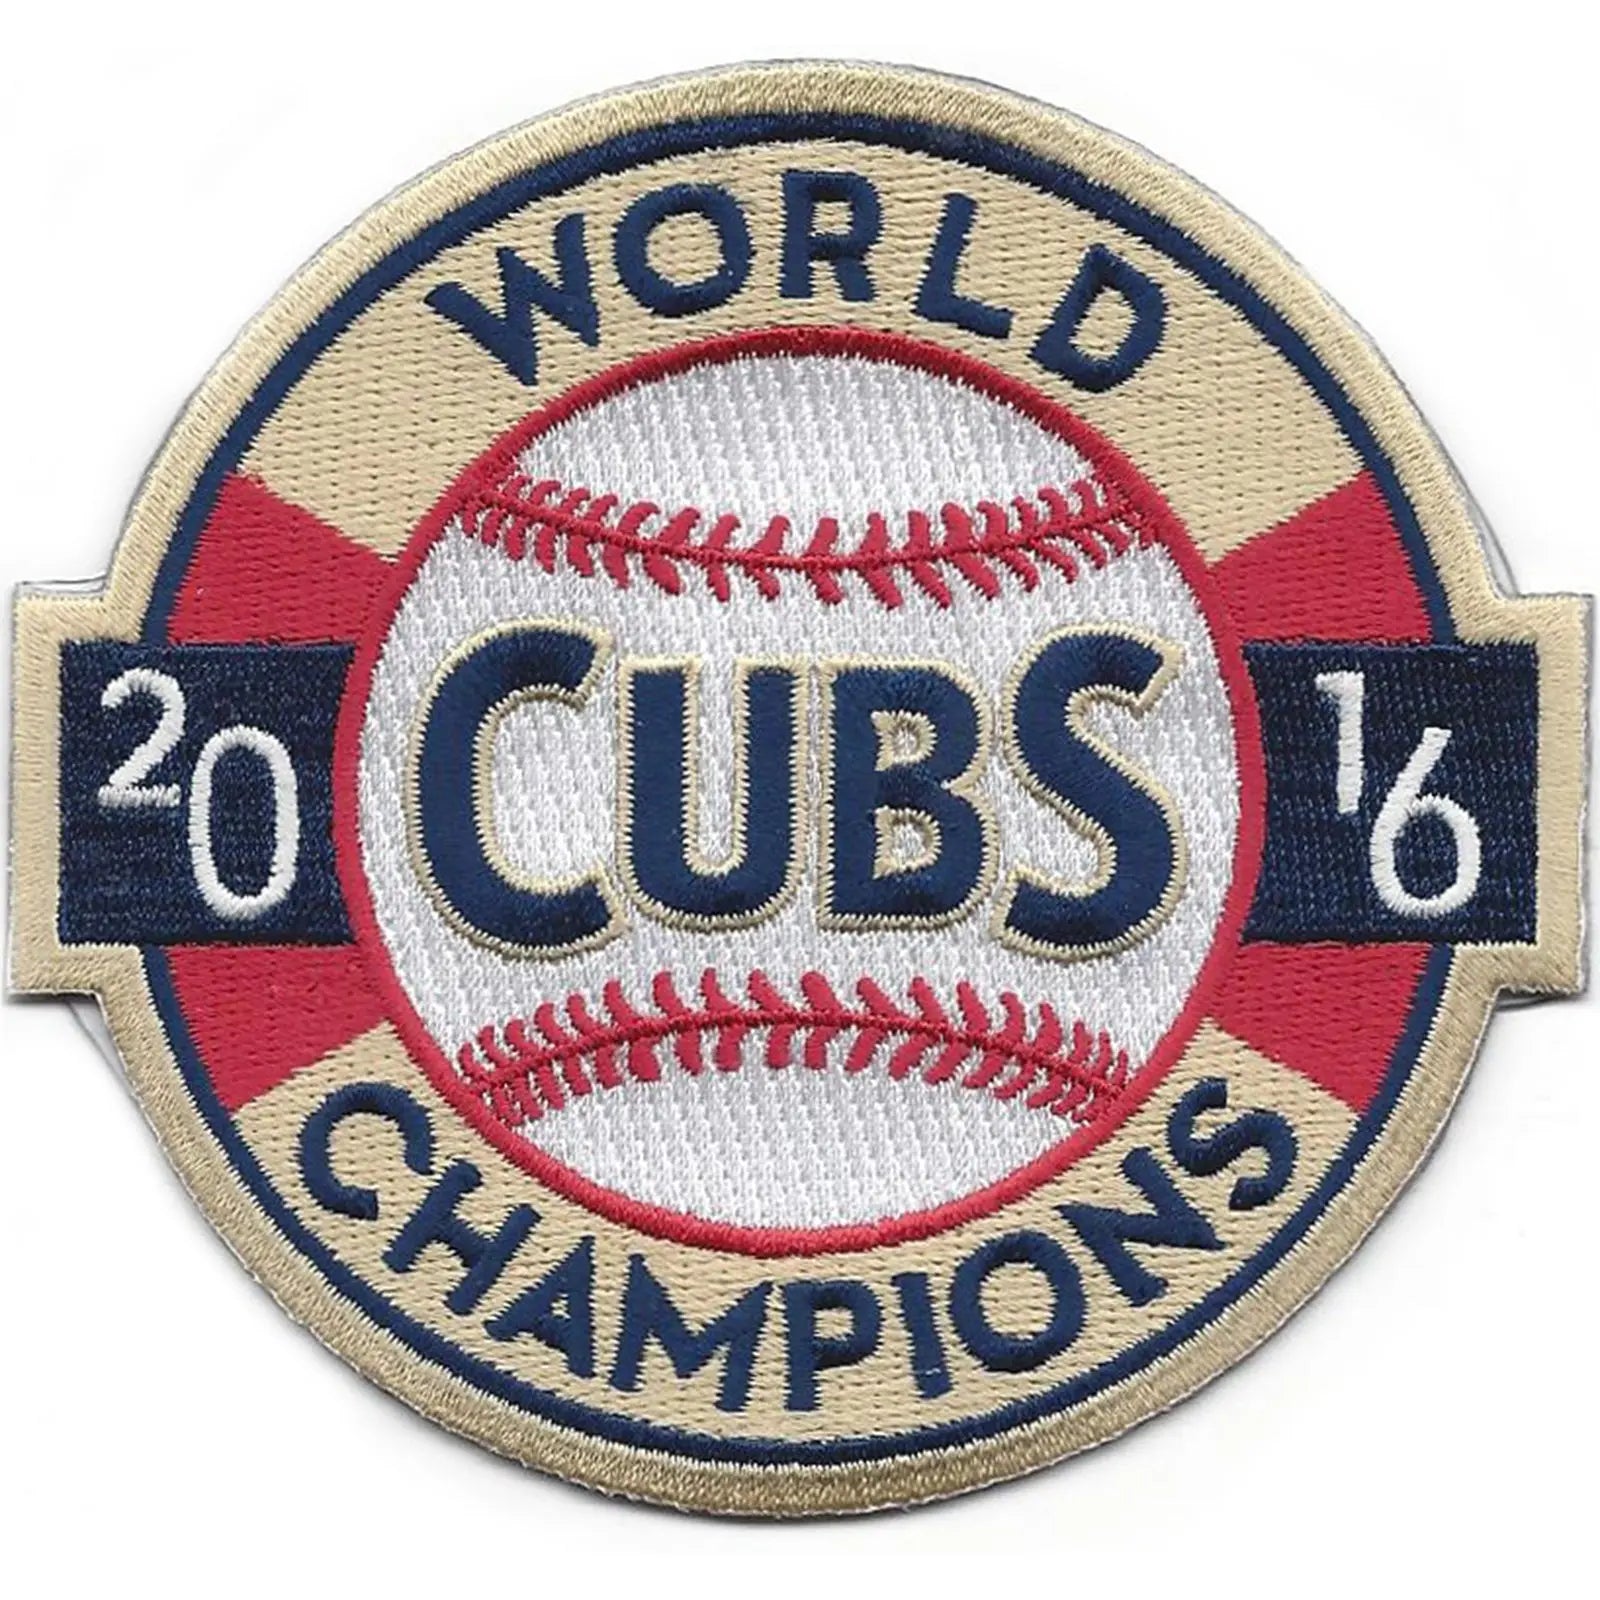 2016 Chicago Cubs MLB World Series Championship Jersey Patch (1907